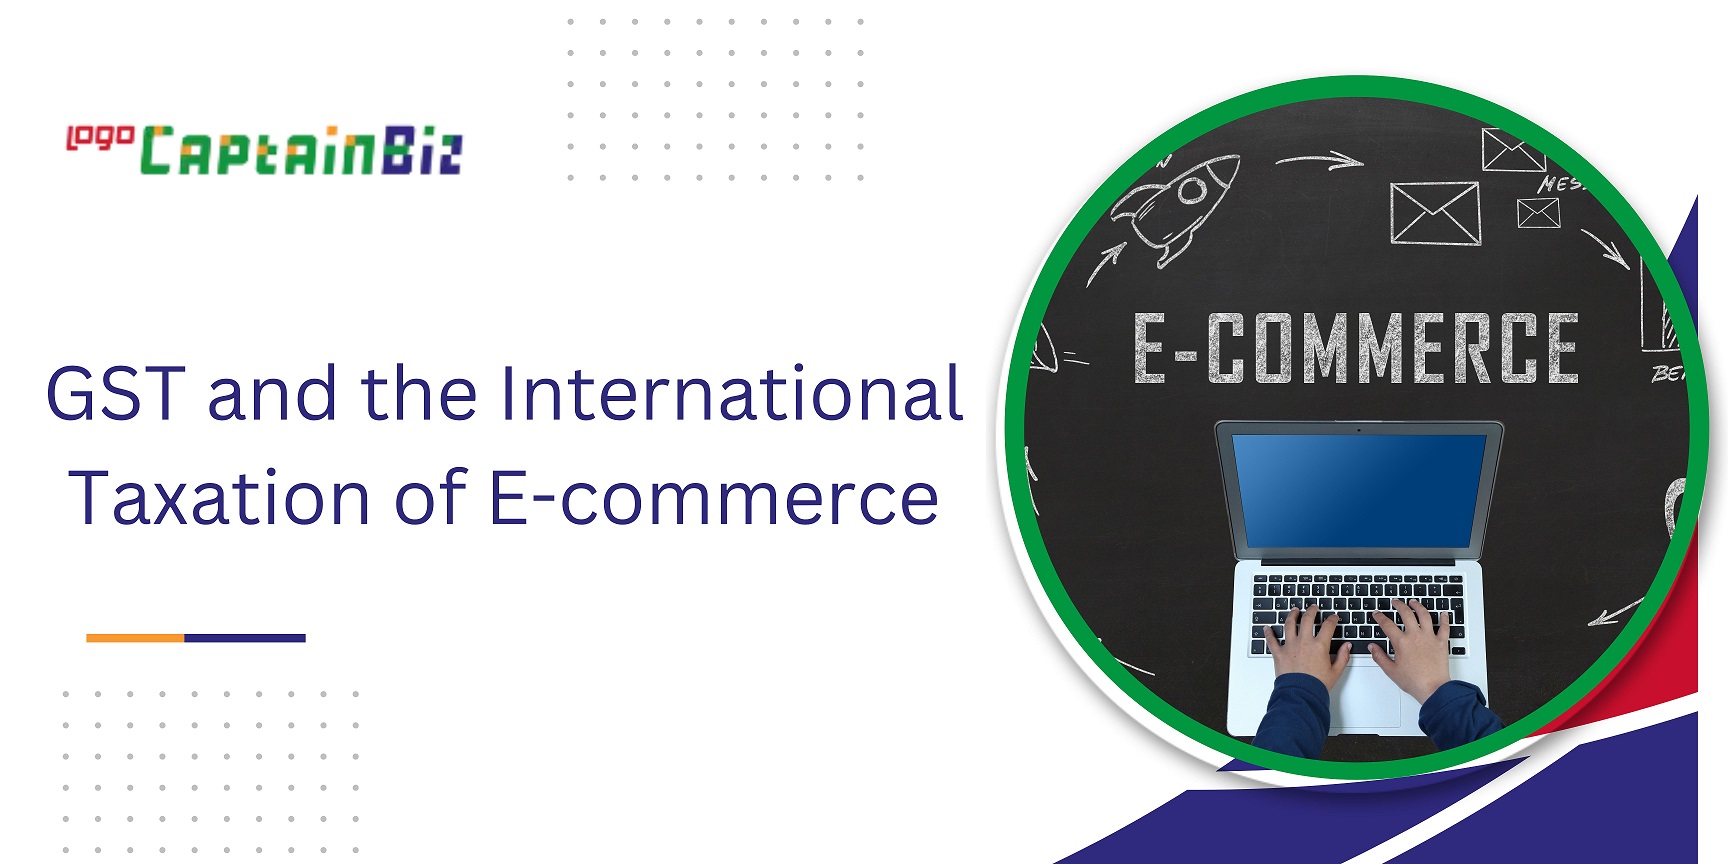 CaptainBiz: GST and the International Taxation of E-commerce